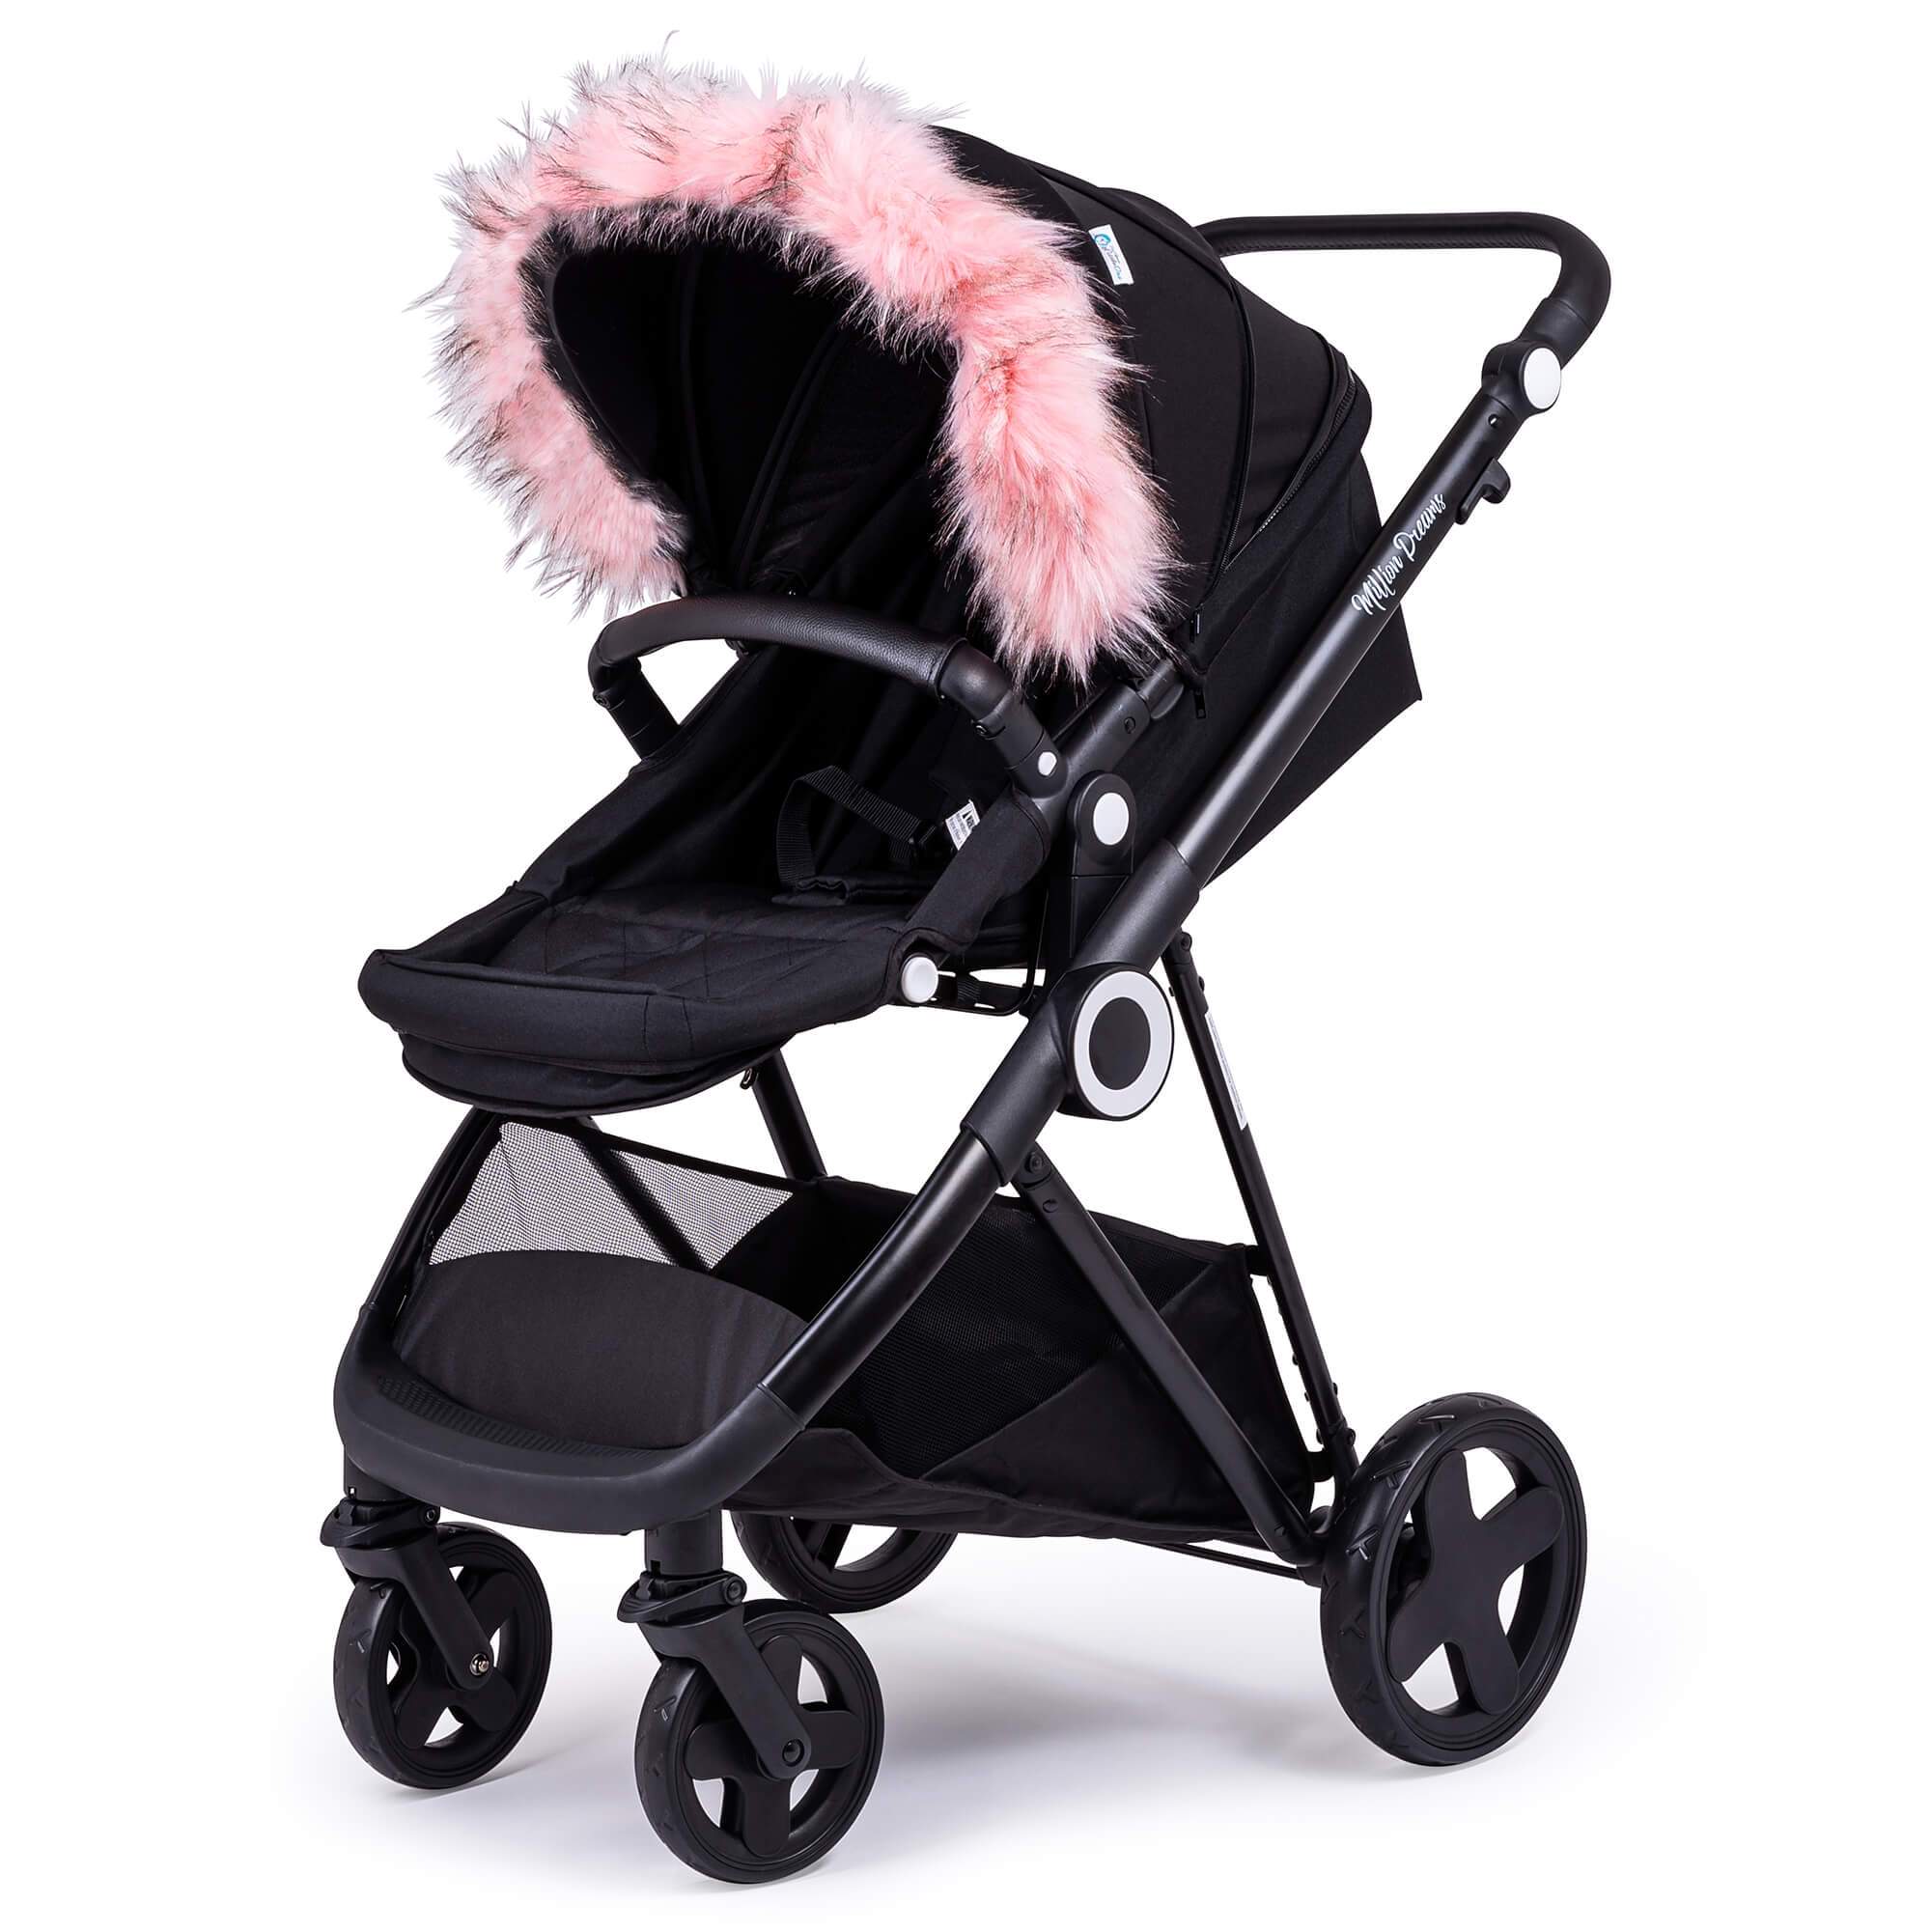 Pram Fur Hood Trim Attachment for Pushchair Compatible with Babyzen - Light Pink / Fits All Models | For Your Little One